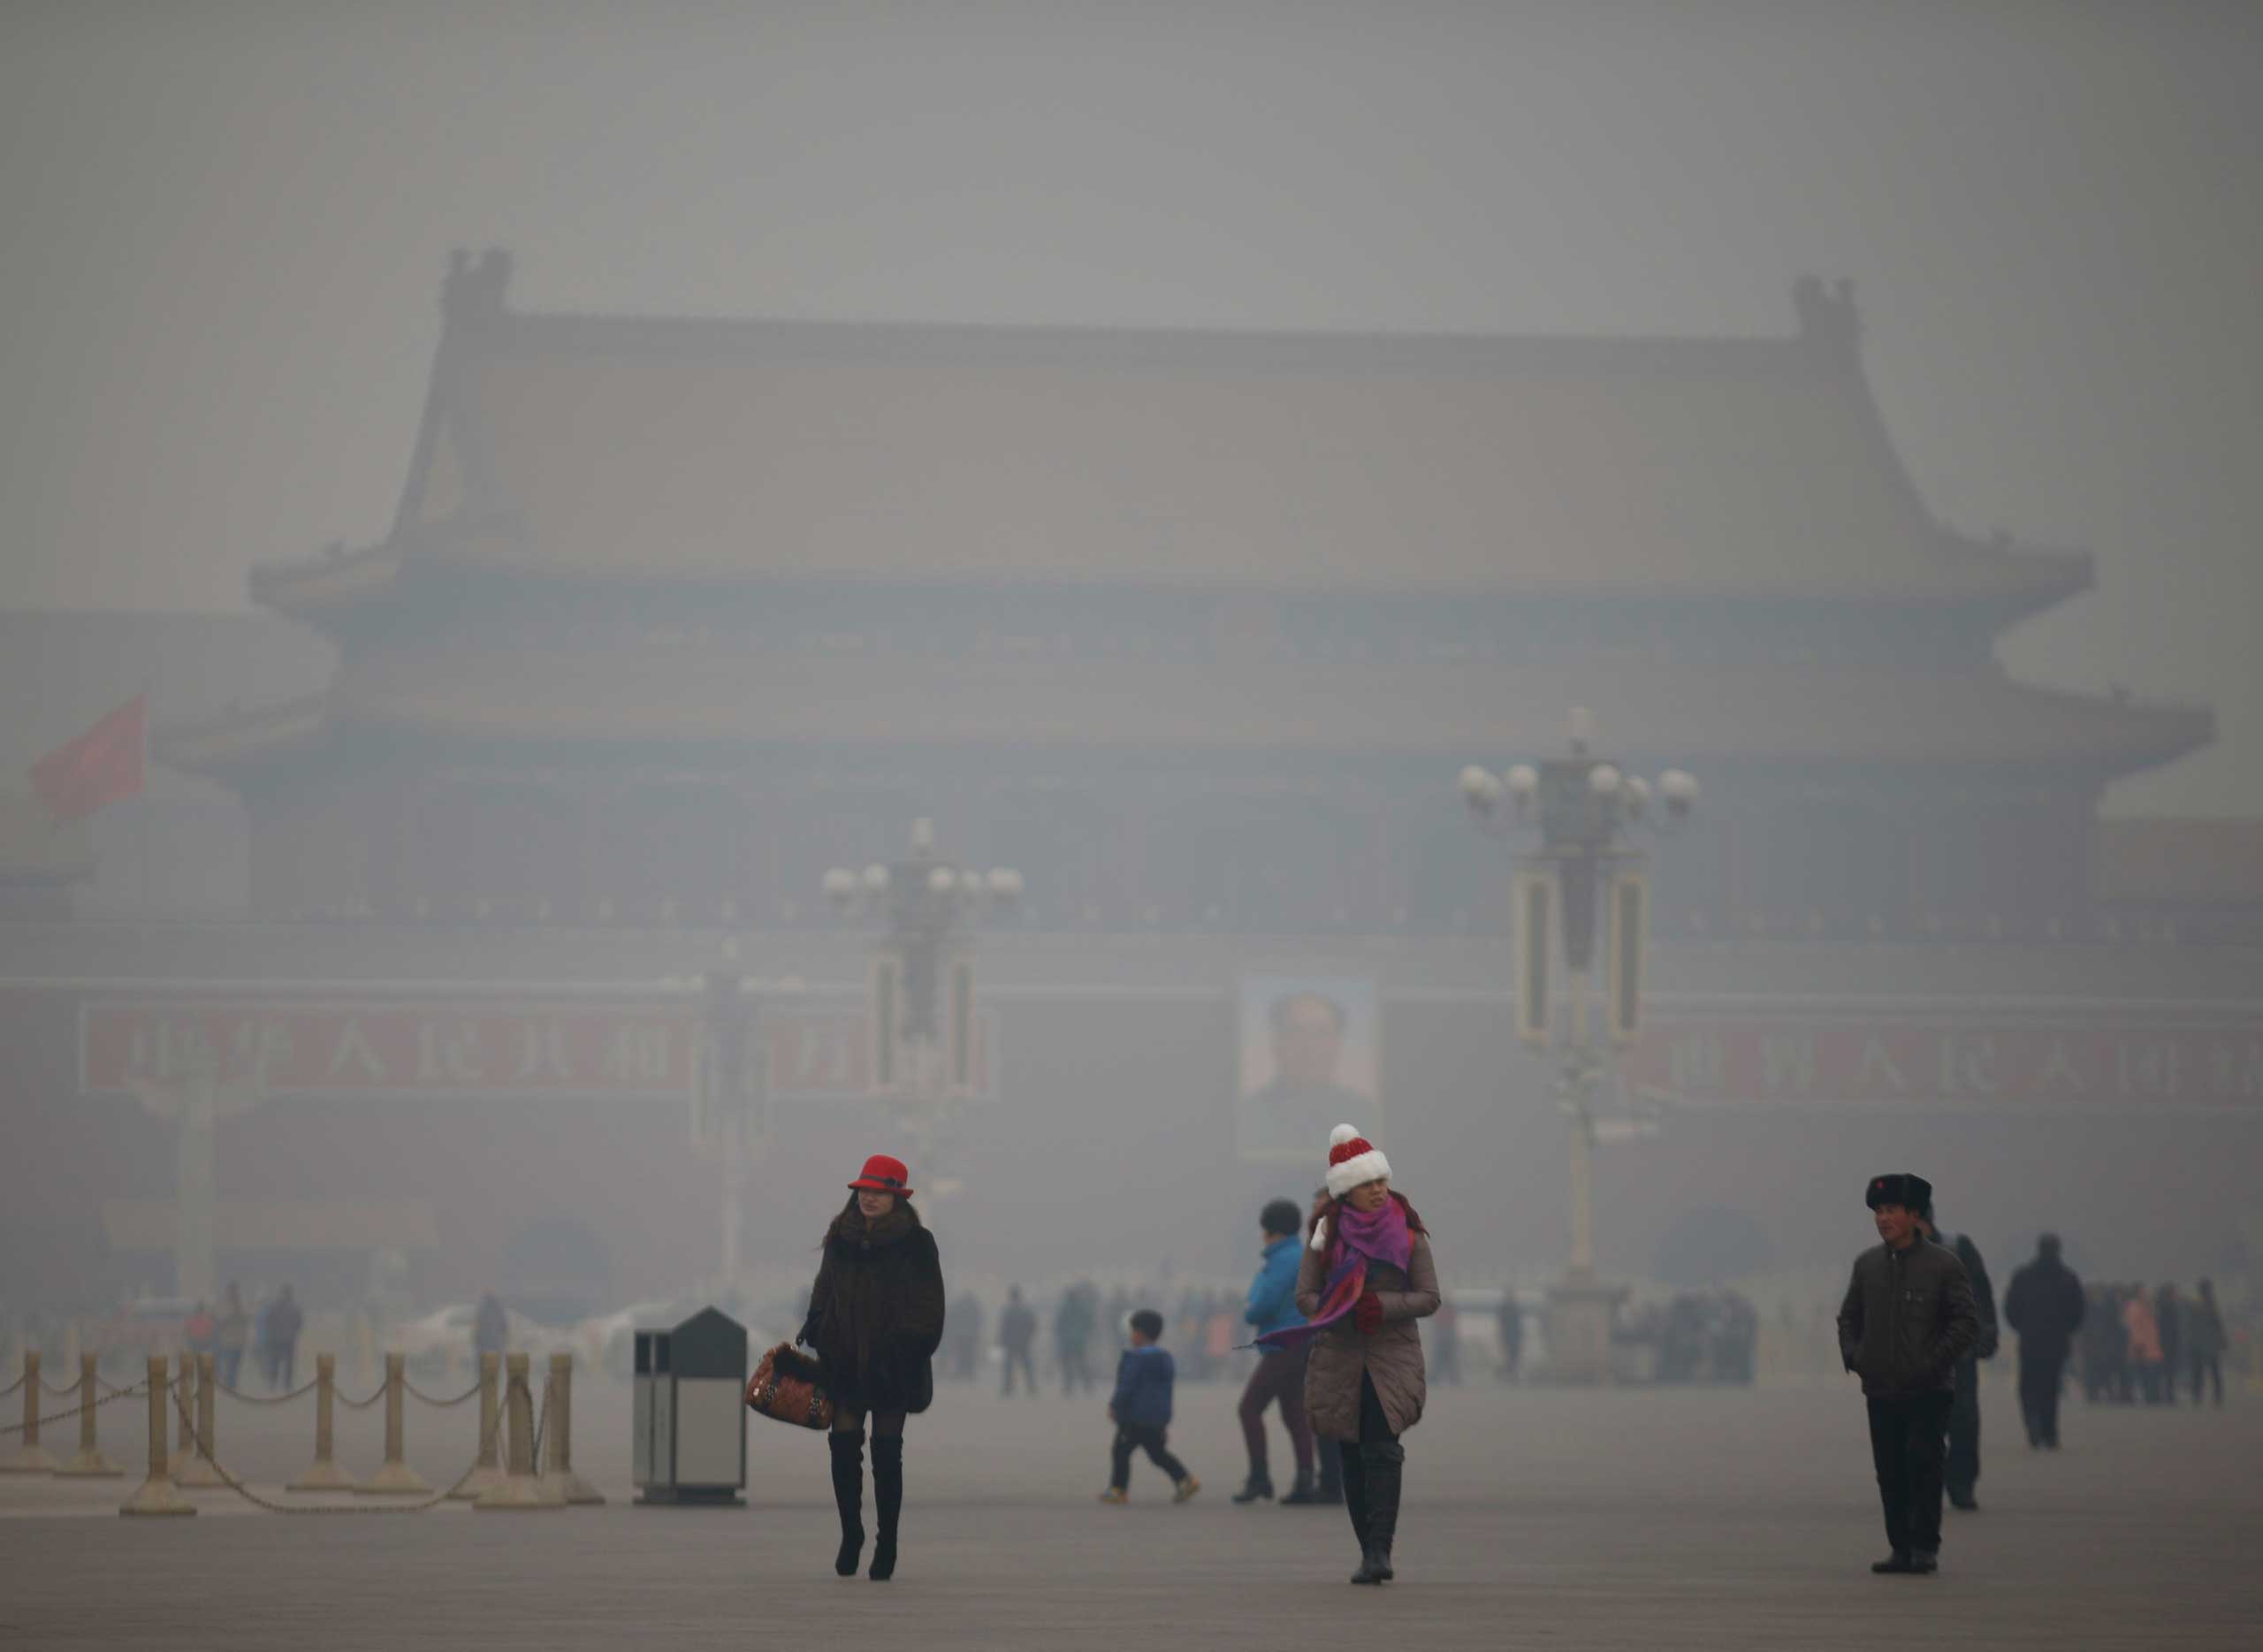 Visitors take a walk during a polluted day at Tiananmen Square in Beijing on Jan. 15, 2015. (Kim Kyung-Hoon—Reuters)